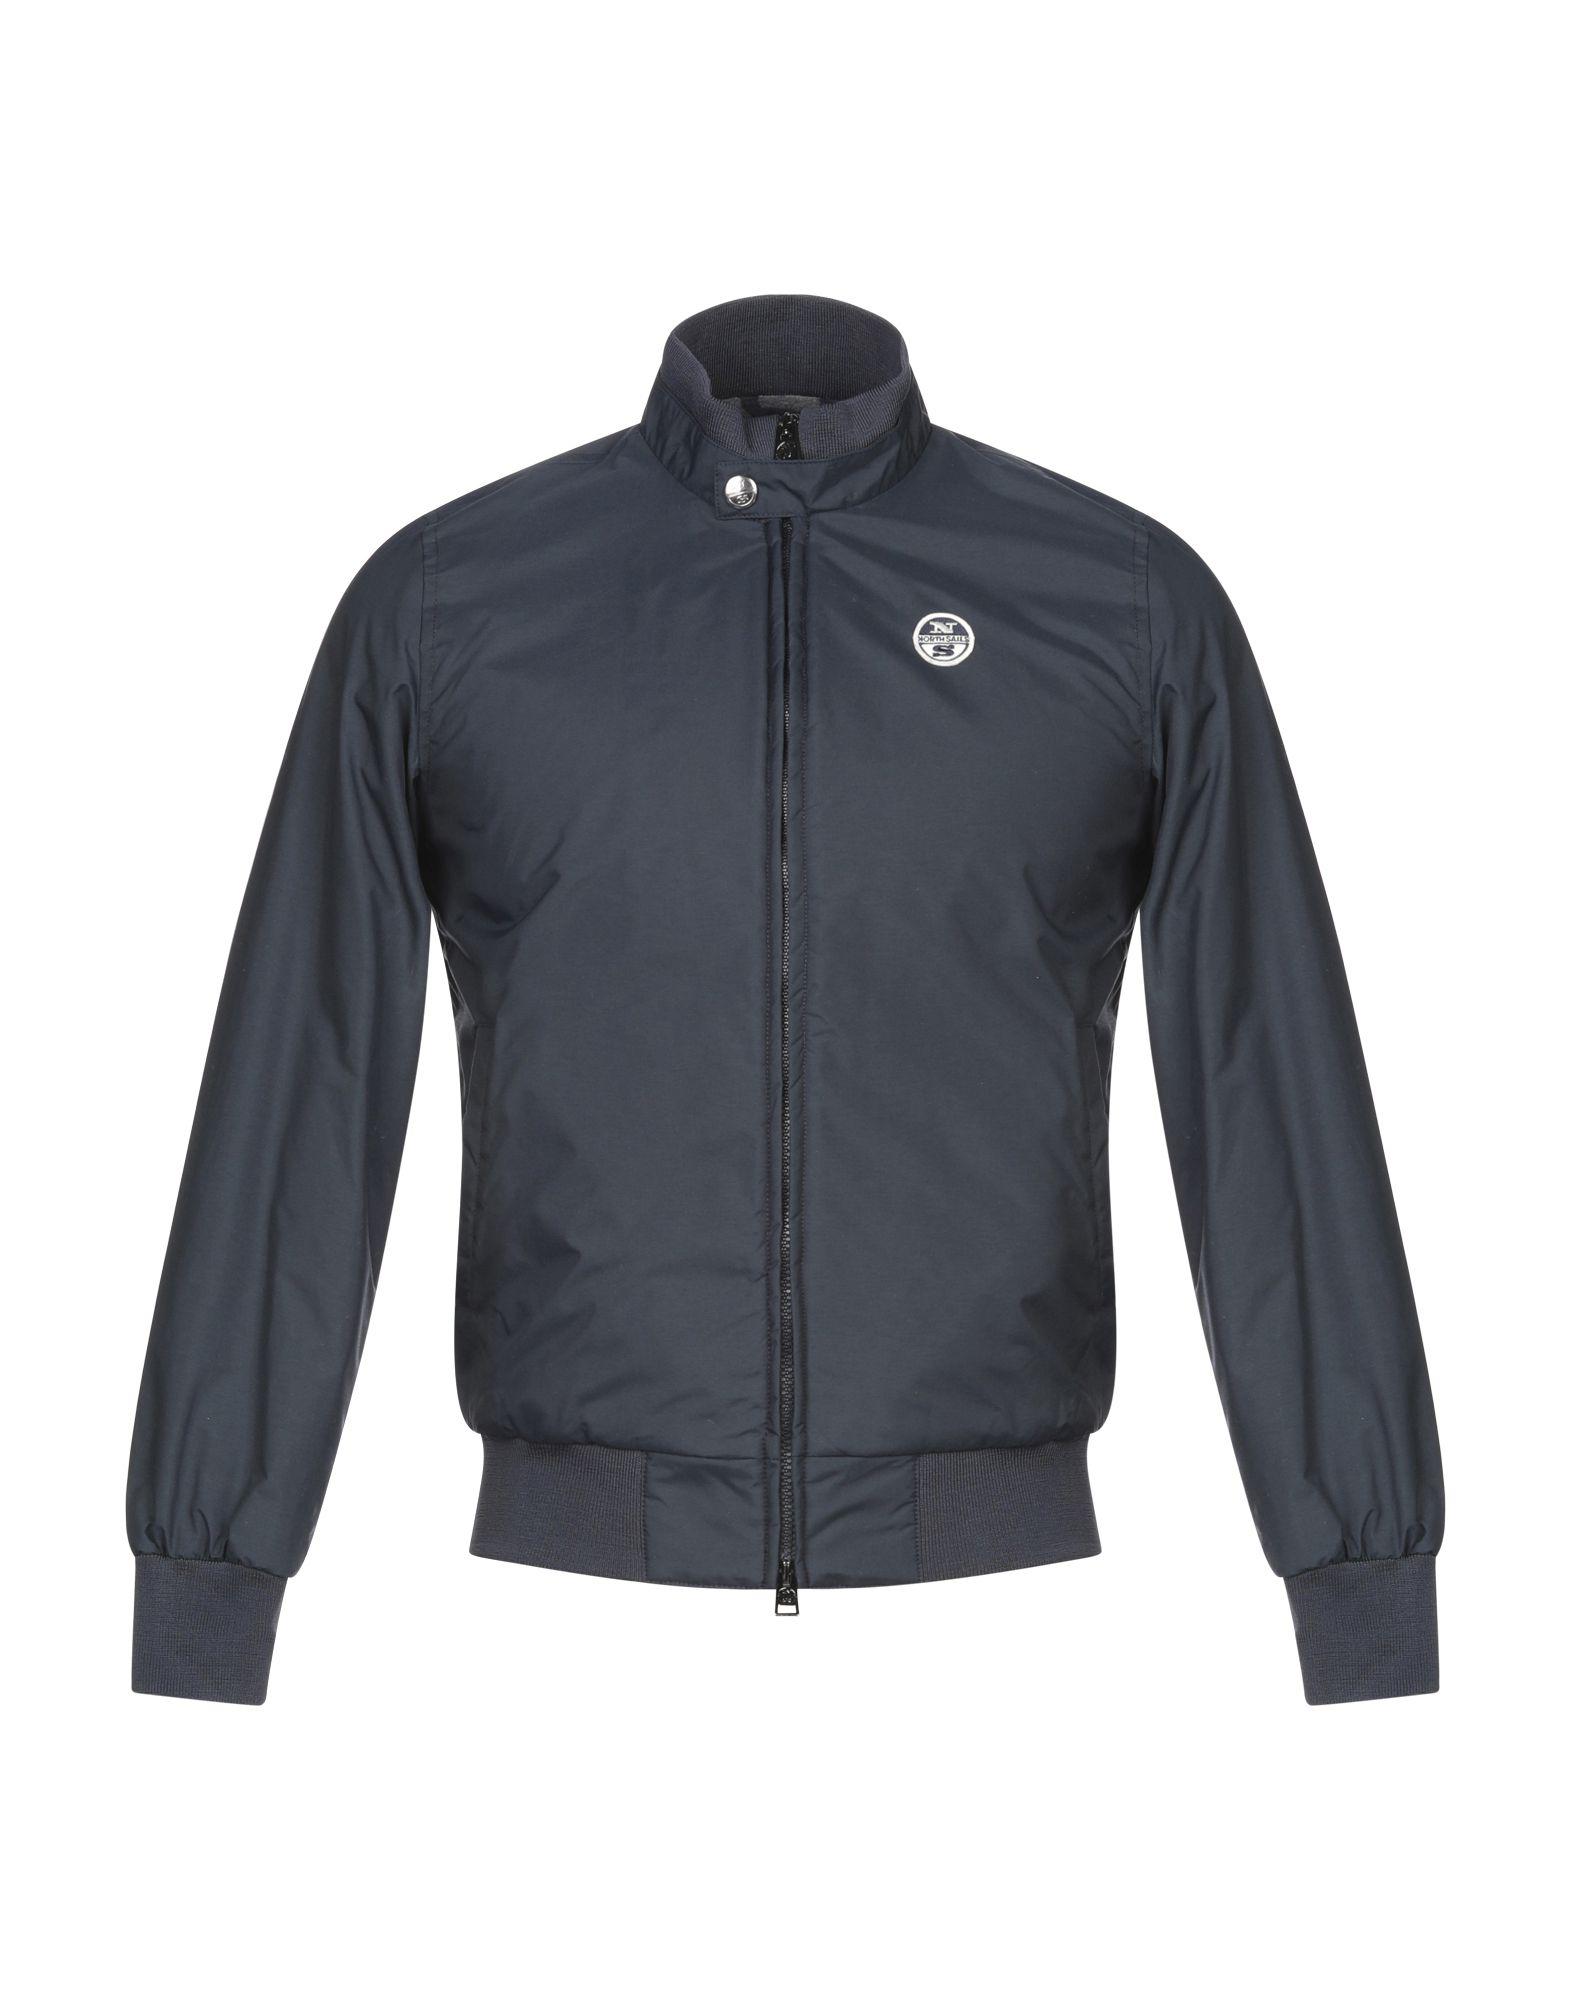 North Sails Synthetic Jacket in Dark Blue (Blue) for Men - Lyst